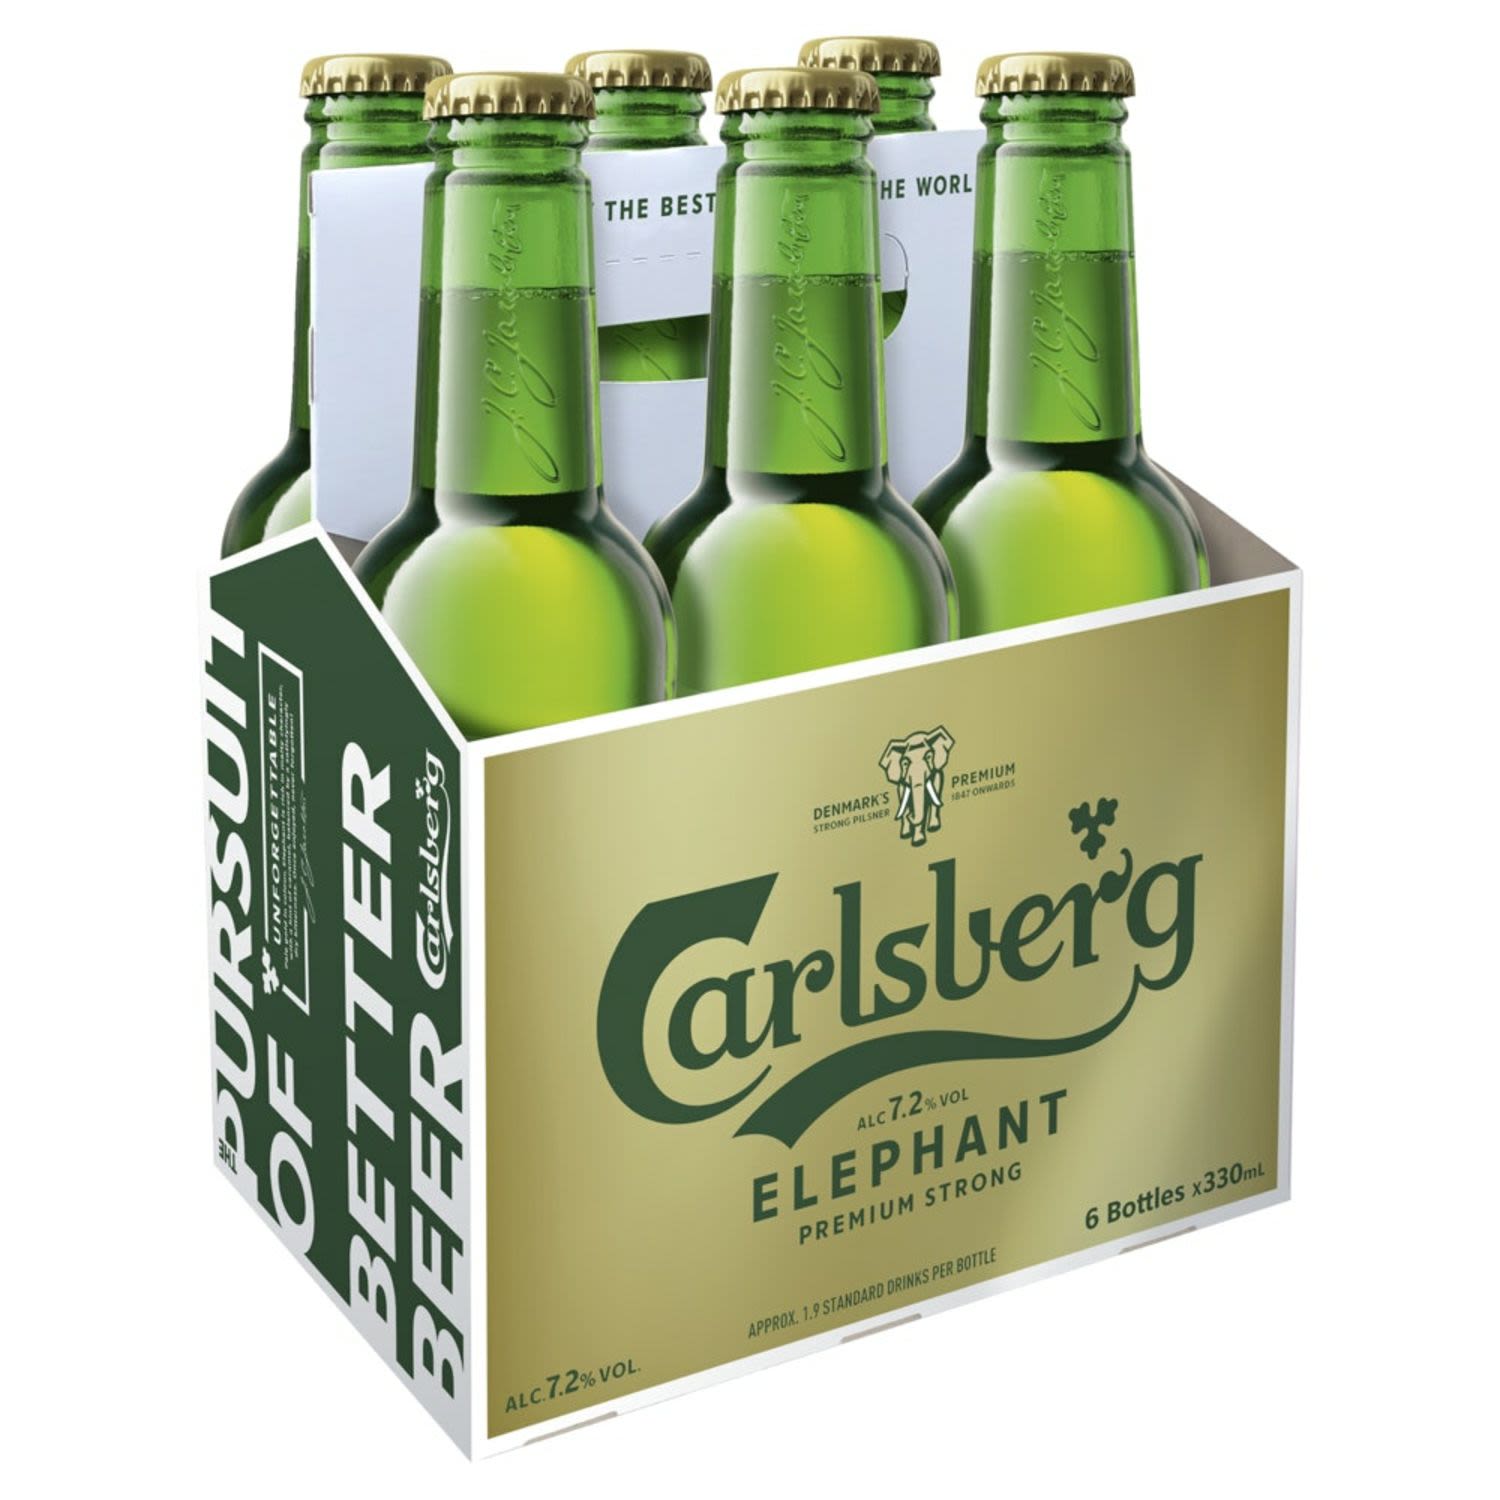 Carlsberg Elephant offers adventurous beer drinkers a unique and unforgettable taste experience. Pale gold in colour, Elephant is rich in malty character with a hint of caramel, balanced by a satisfyingly dry bitterness.<br /> <br />Alcohol Volume: 7.20%<br /><br />Pack Format: 6 Pack<br /><br />Standard Drinks: 1.9</br /><br />Pack Type: Bottle<br /><br />Country of Origin: Denmark<br />